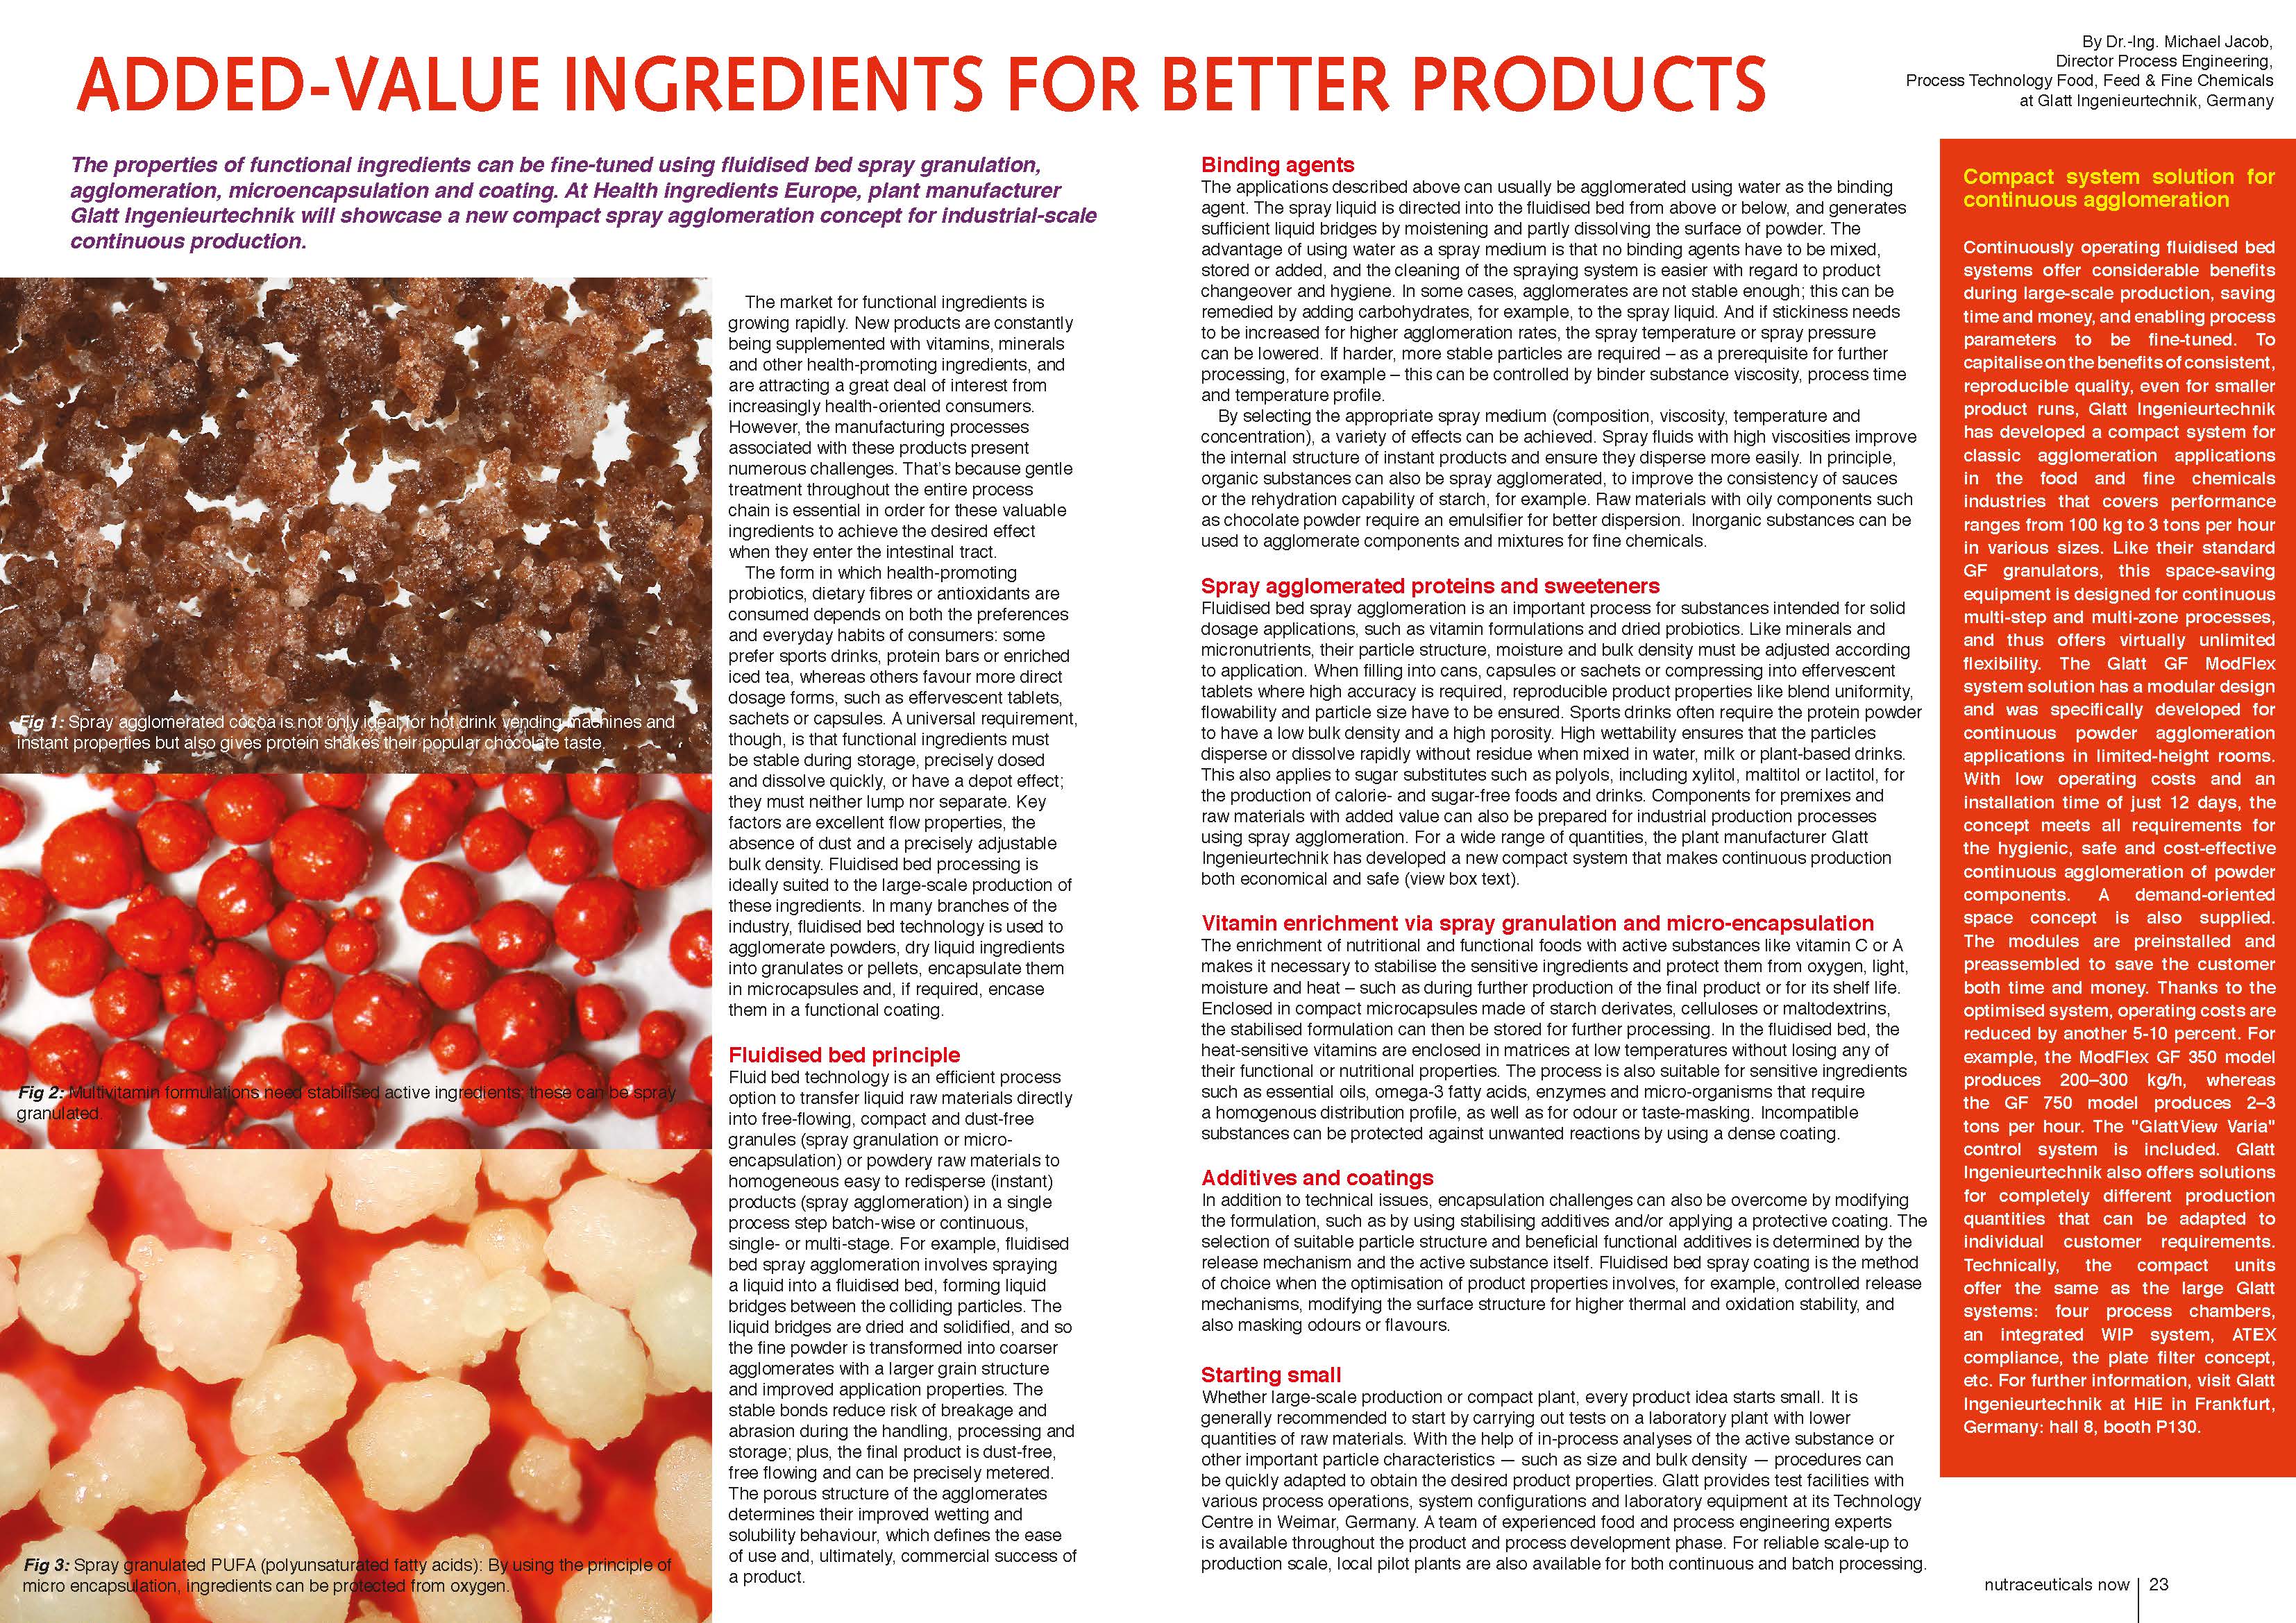 Added-value ingredients for better products